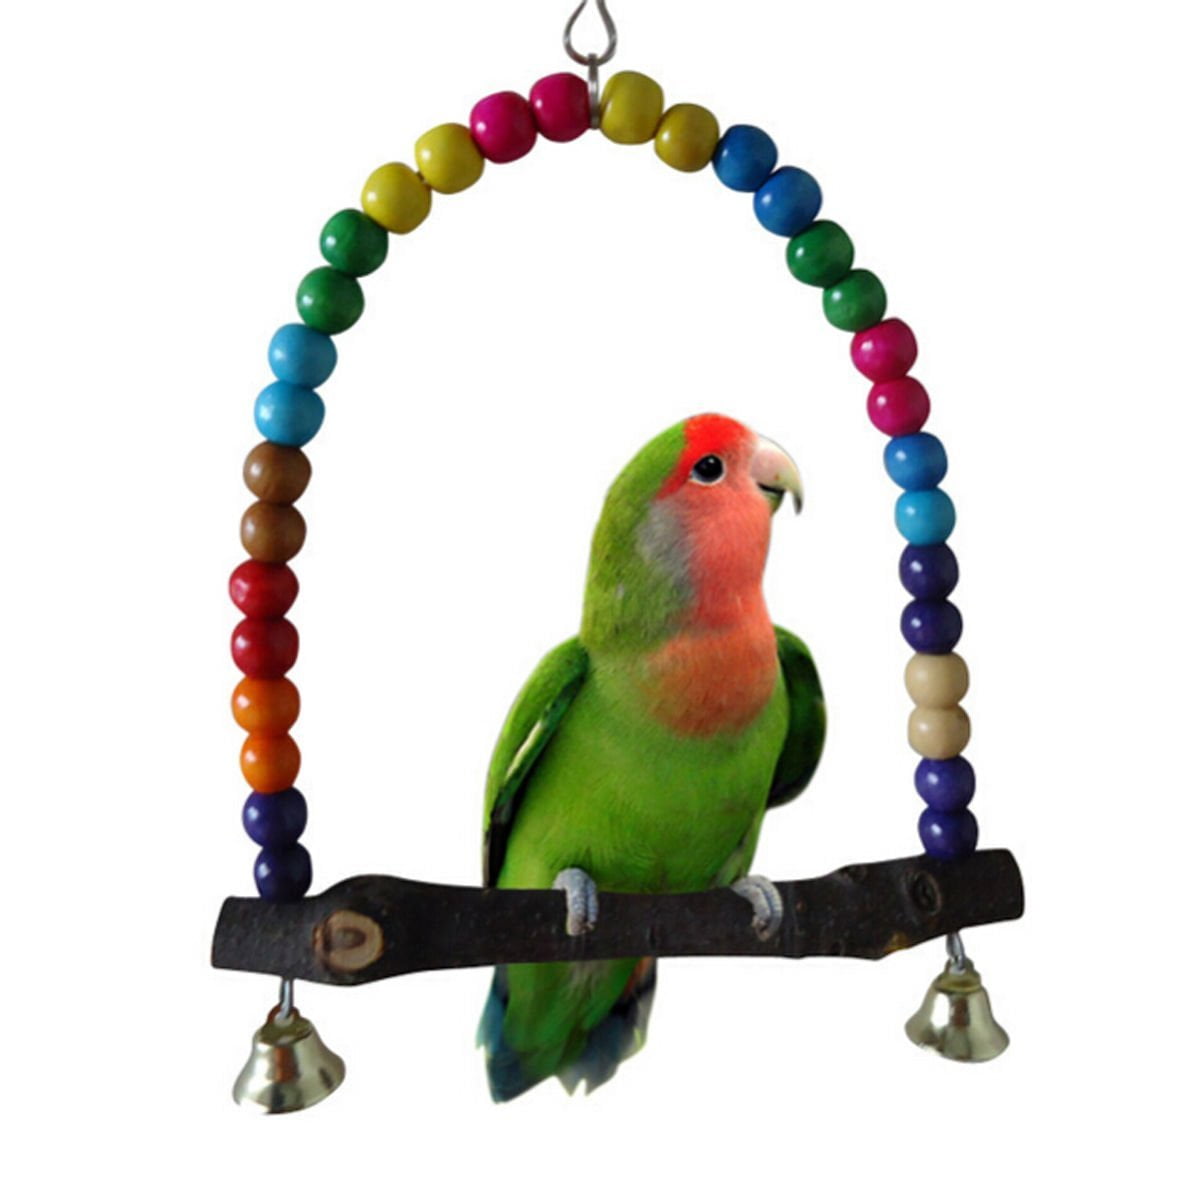 Bird Toy Plastic LARGE Mirror Bell PINK Budgie Canary Cockatiel Parakeet 3 Inch 